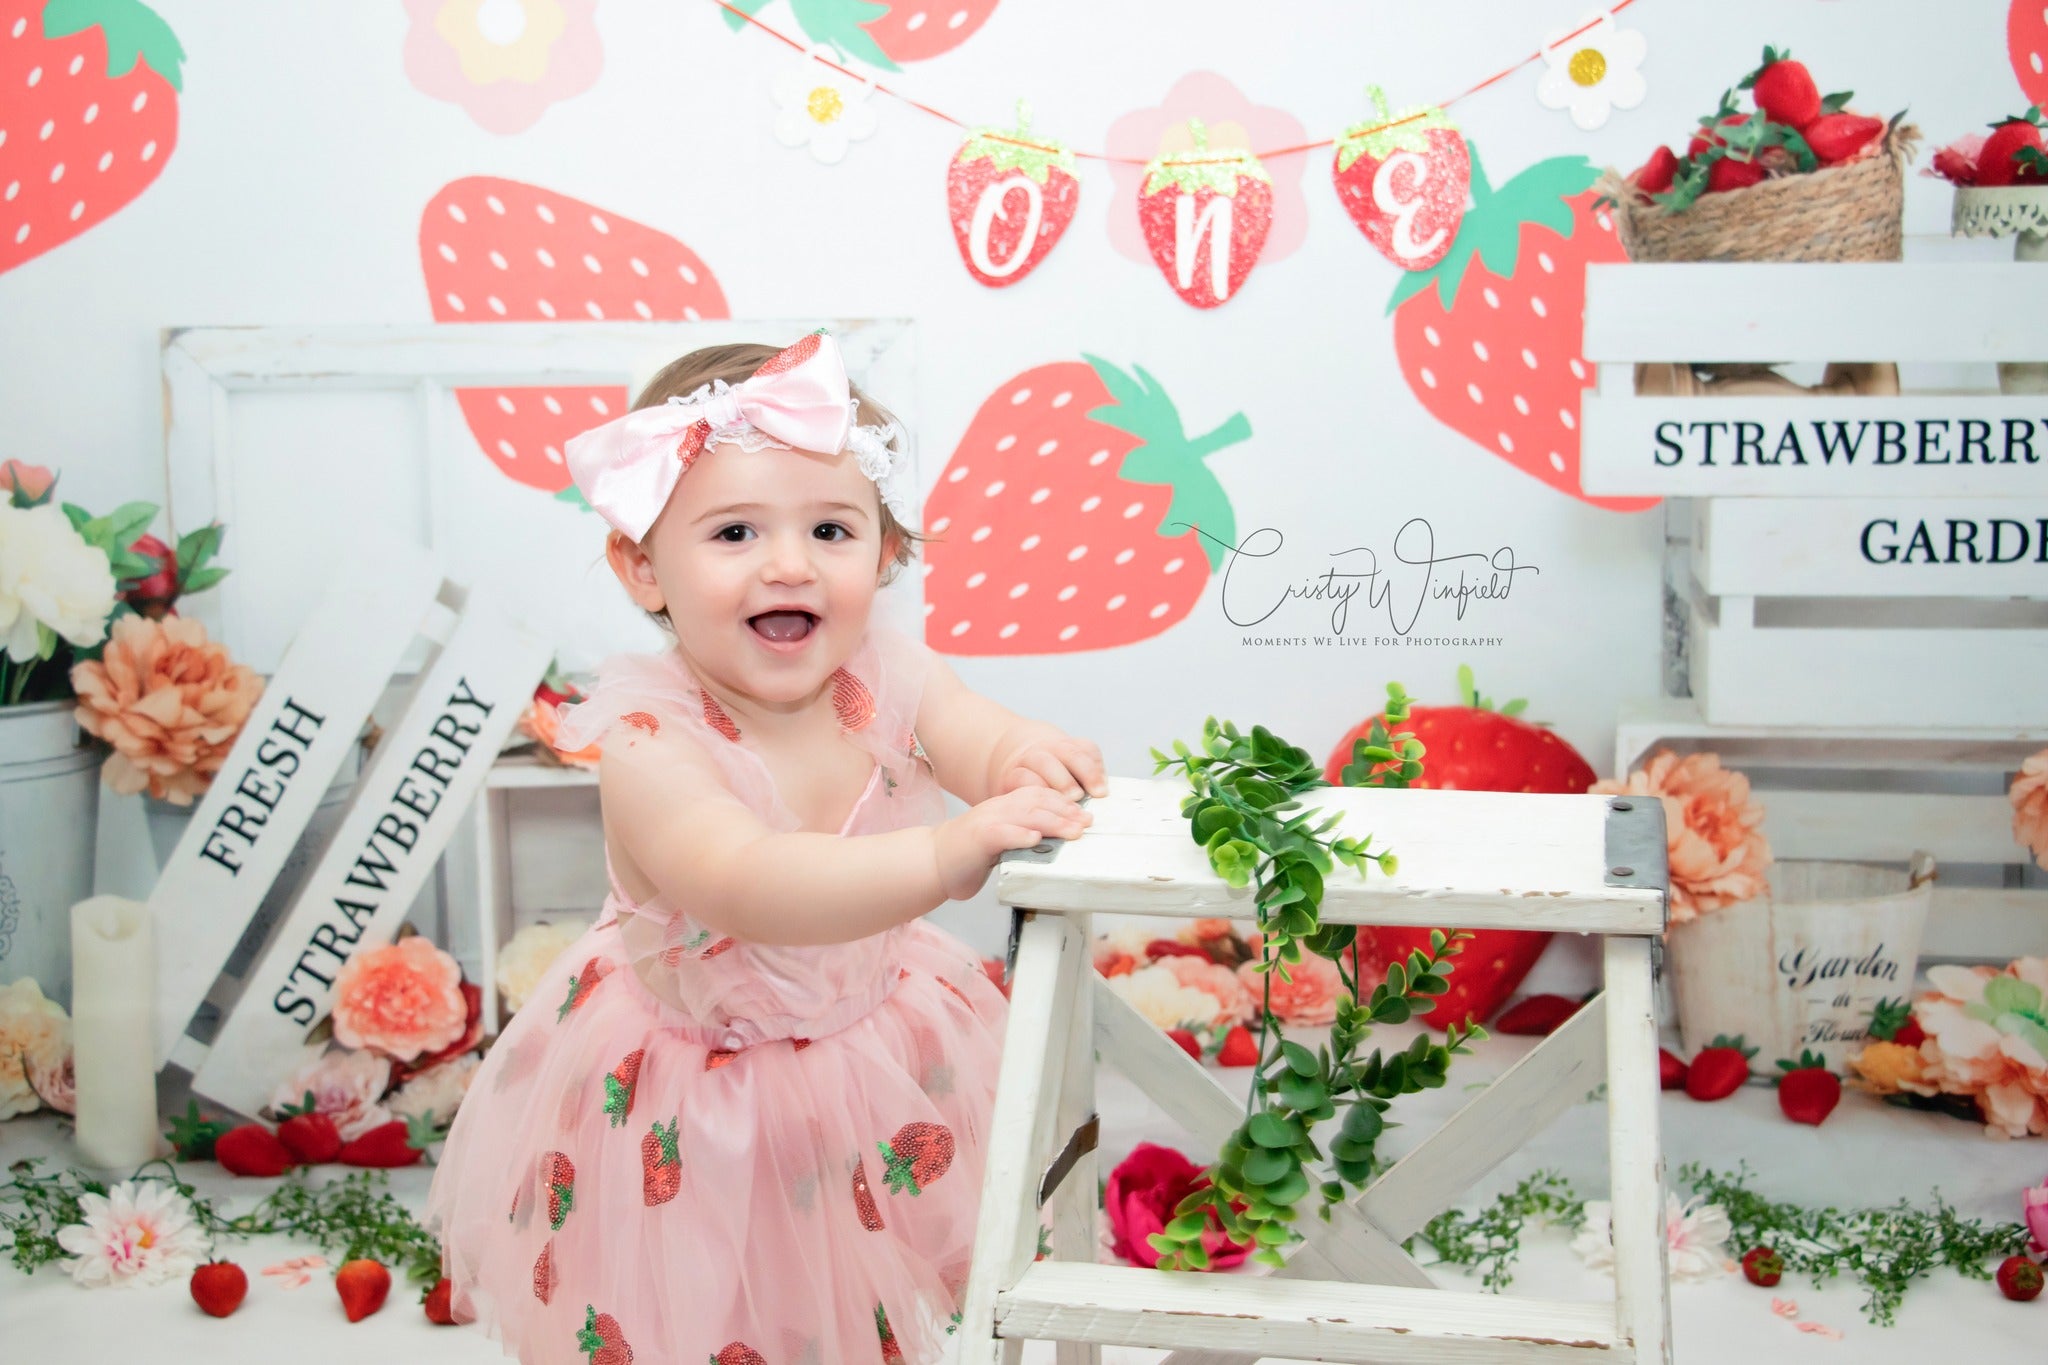 Kate Summer Strawberry Pink Backdrop Designed by Emetselch